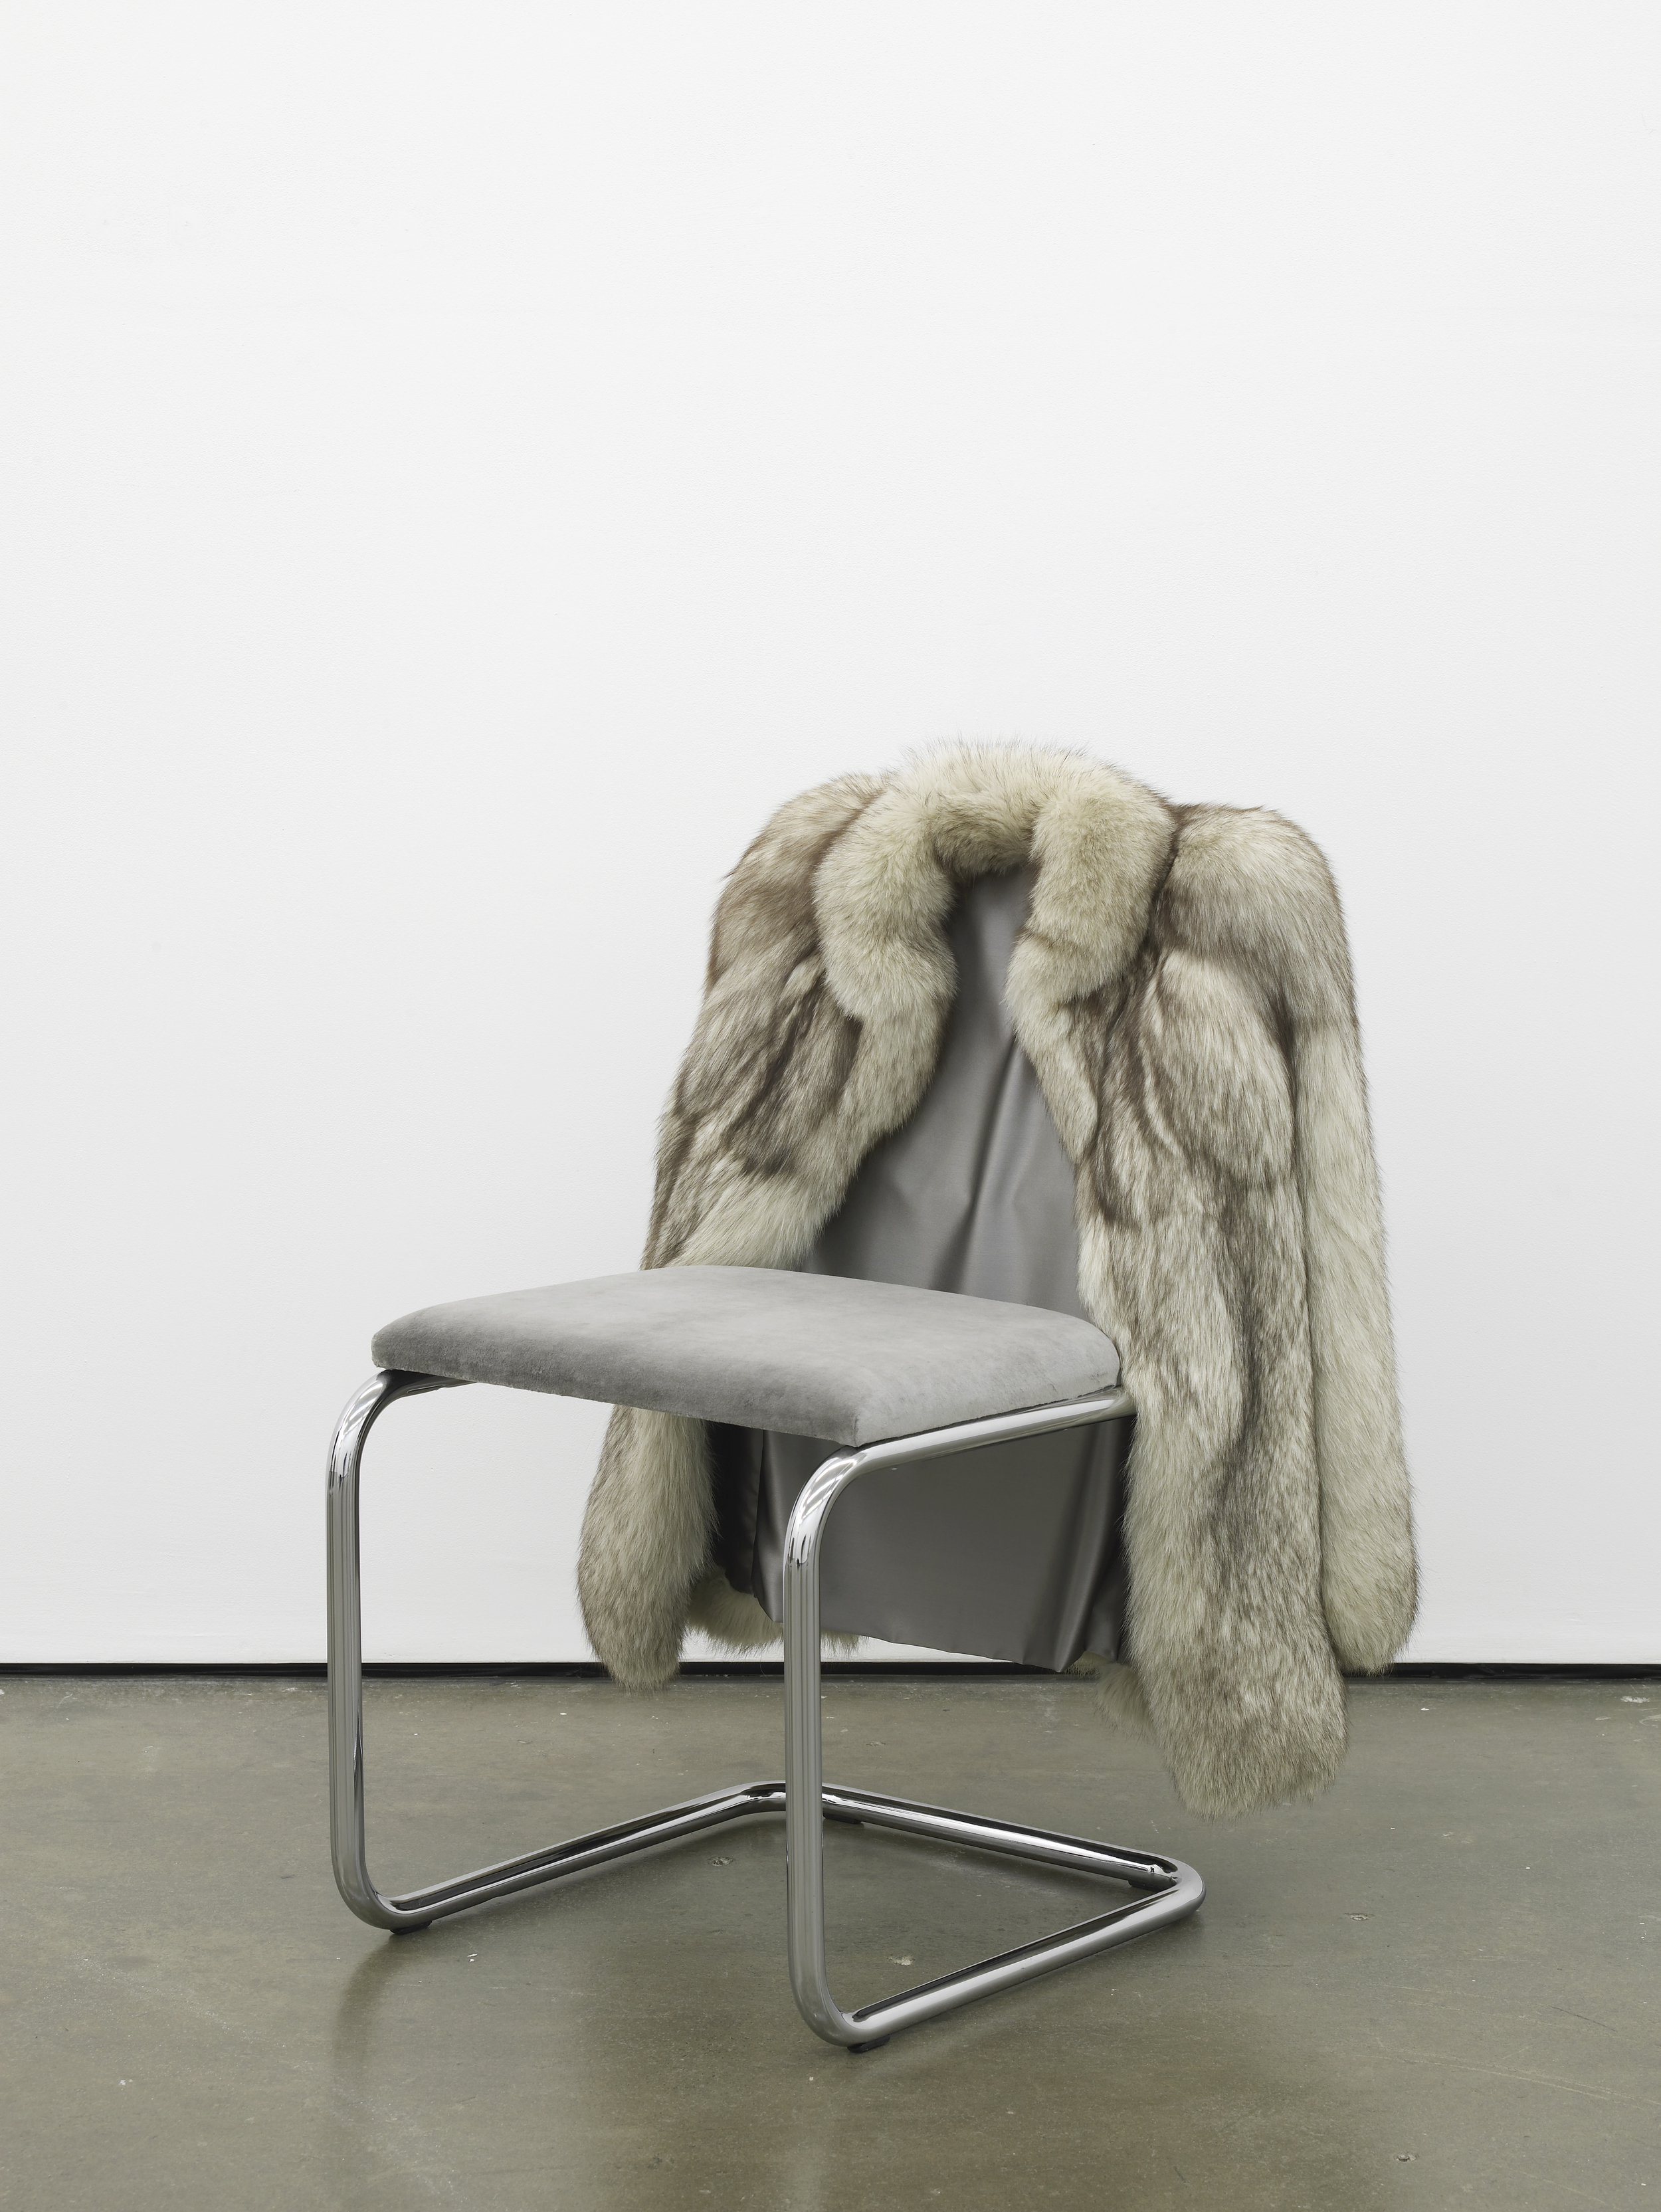     Untitled Chair - FXG-1 2015 Vintage fur, steel tubing, upholstery, silk and velvet 85 x 65 x 60 cm / 33.4 x 25.5 x 23.6 in   